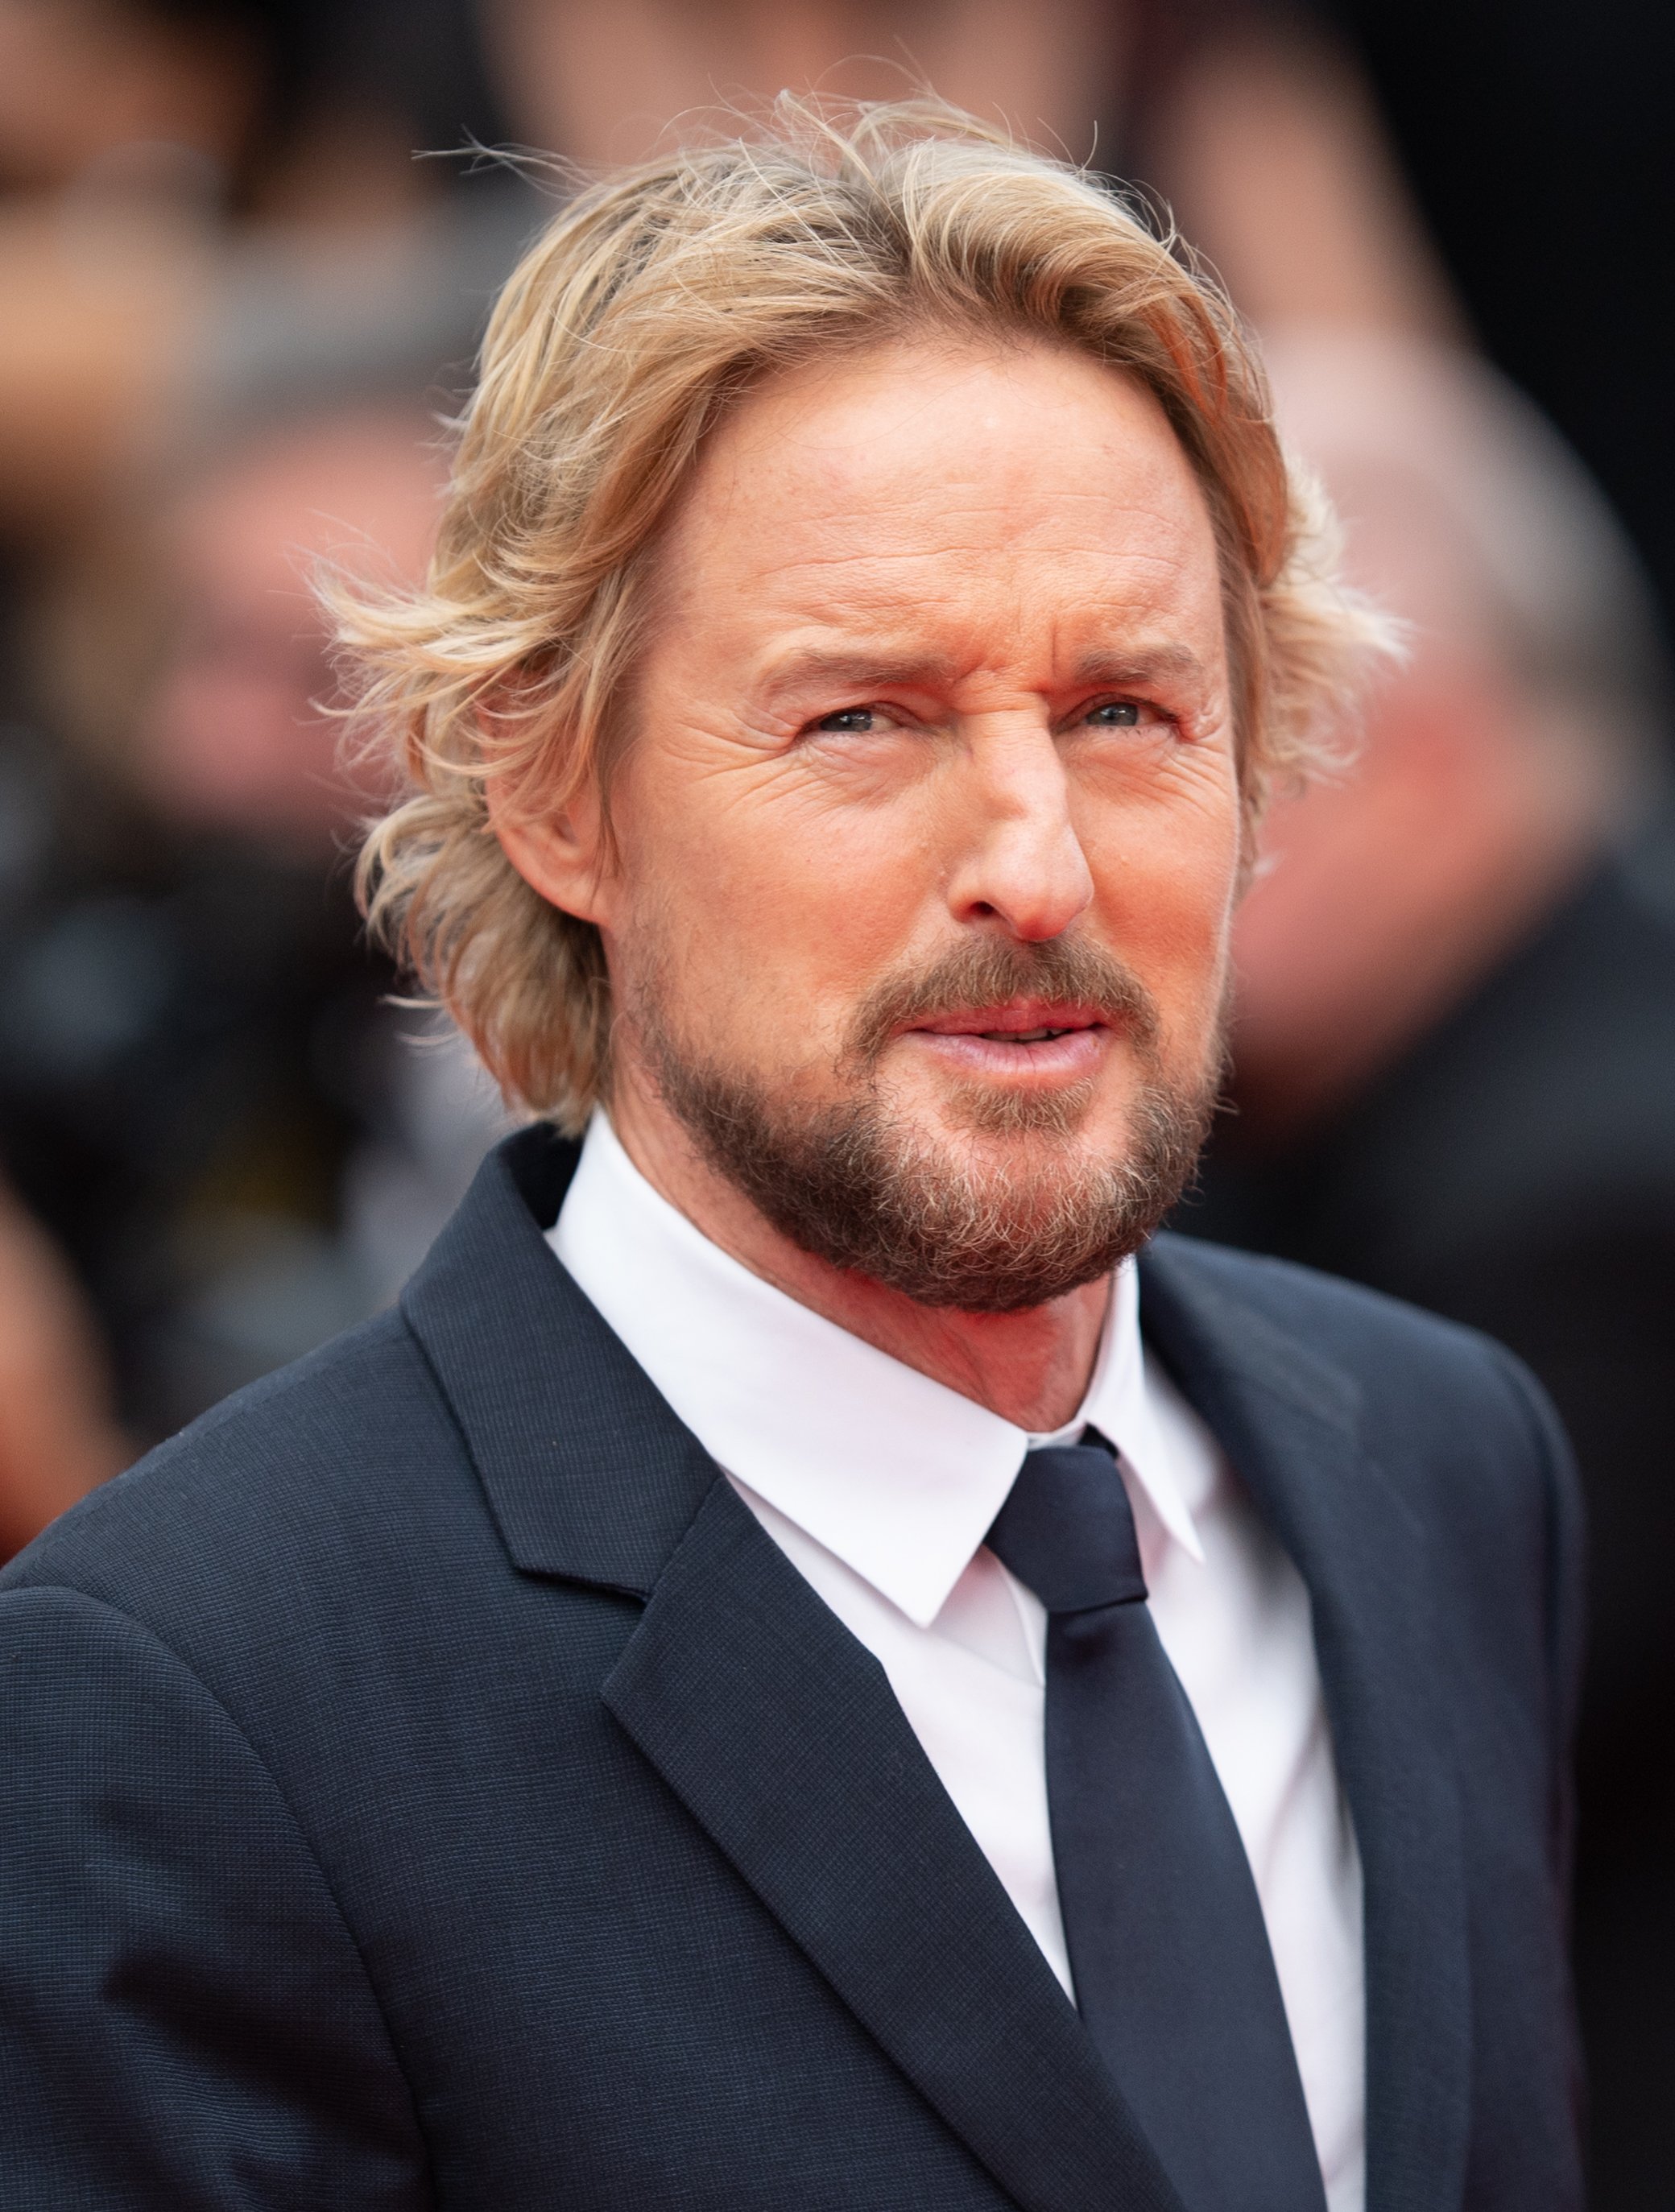 Owen Wilson attends the "The French Dispatch" screening during the 74th annual Cannes Film Festival on July 12, 2021, in Cannes, France. | Source: Getty Images